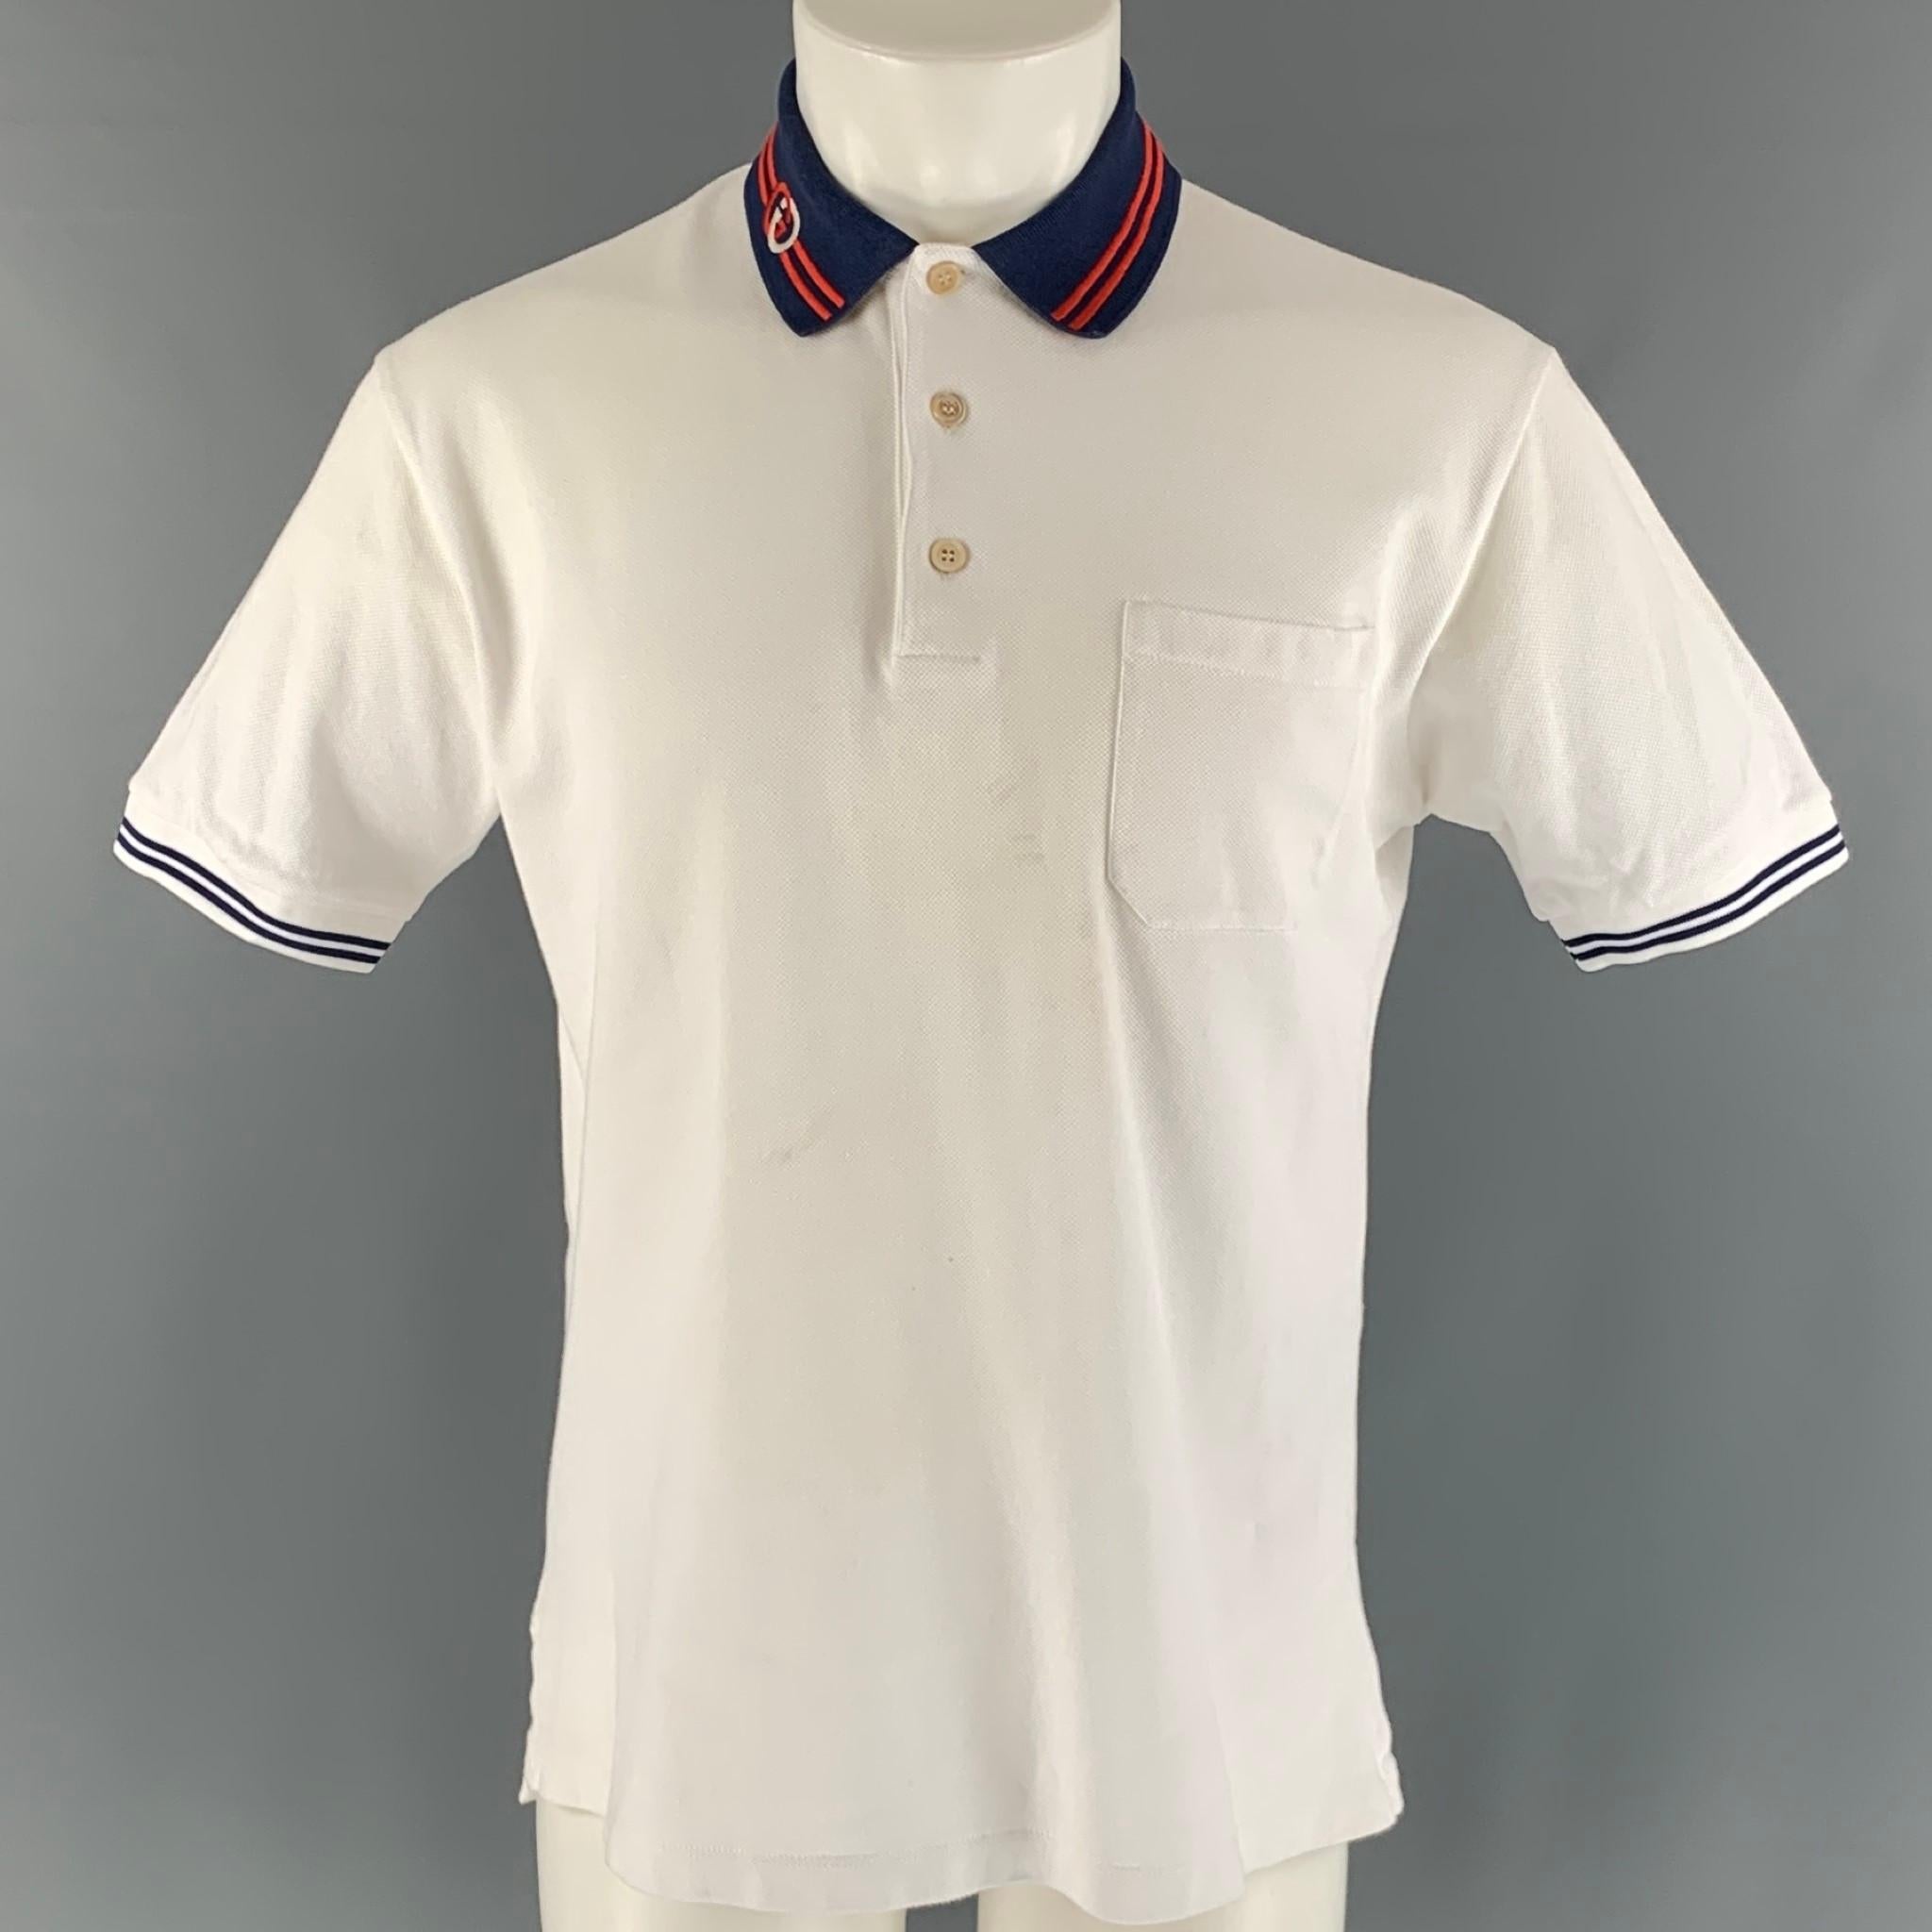 GUCCI polo comes in a white cotton piquet knit featuring a navy 'GG' collar, patch pocket, and a half buttoned closure. Made in Italy.

Very Good Pre-Owned Condition. Minor signs of wear.
Marked: M

Measurements:

Shoulder: 17.5 in.
Chest: 42